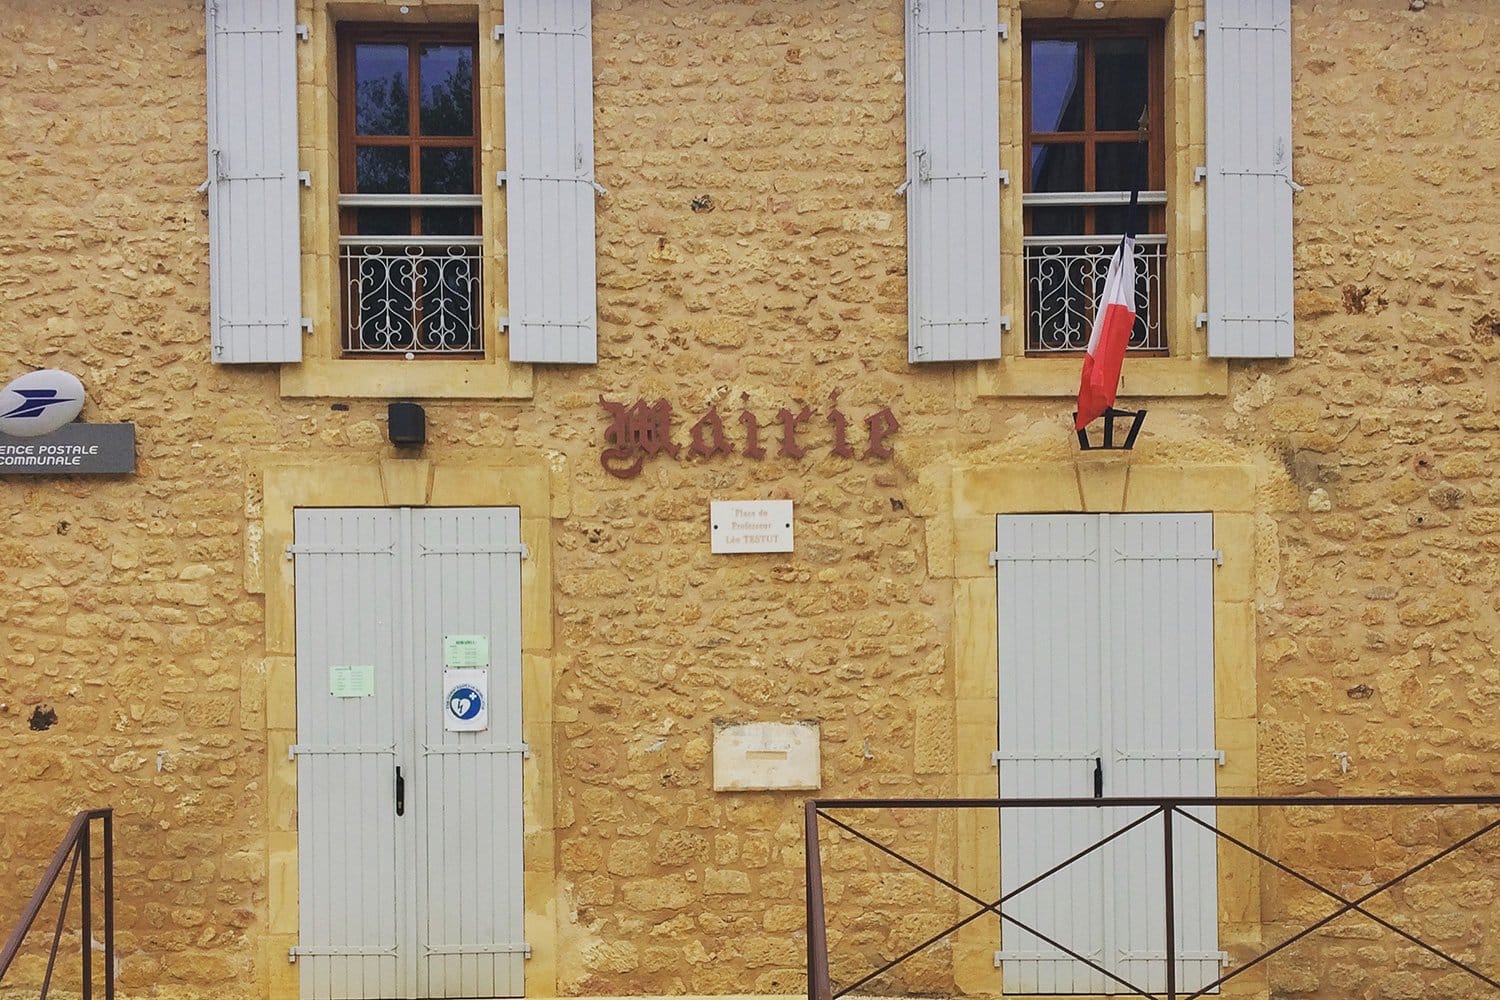 Mairie office in rural France